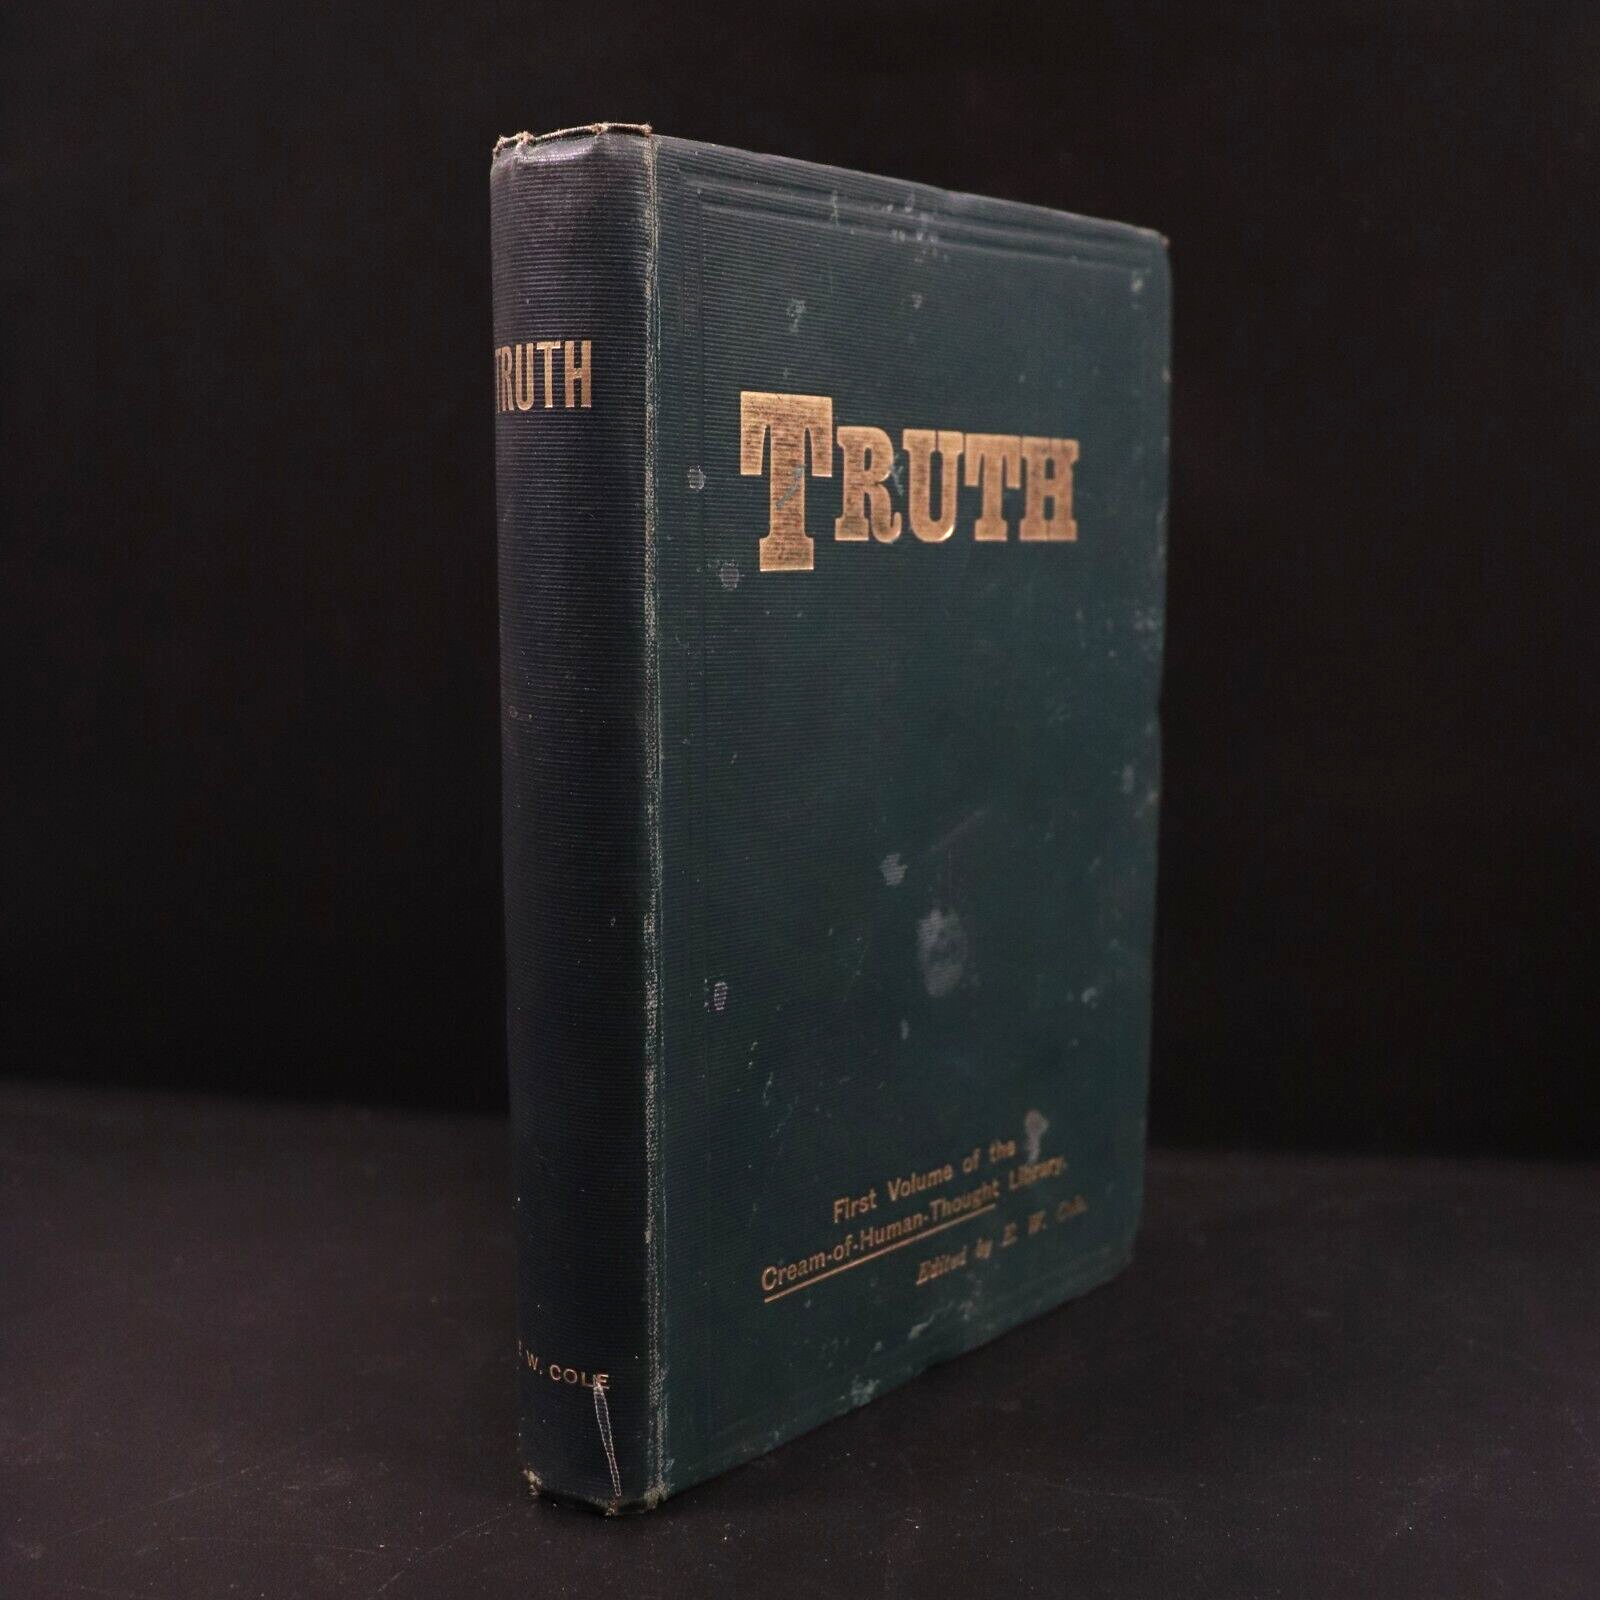 c1910 Truth: Cream Of Human Thought by E.W. Cole Antique Theology Book 2nd